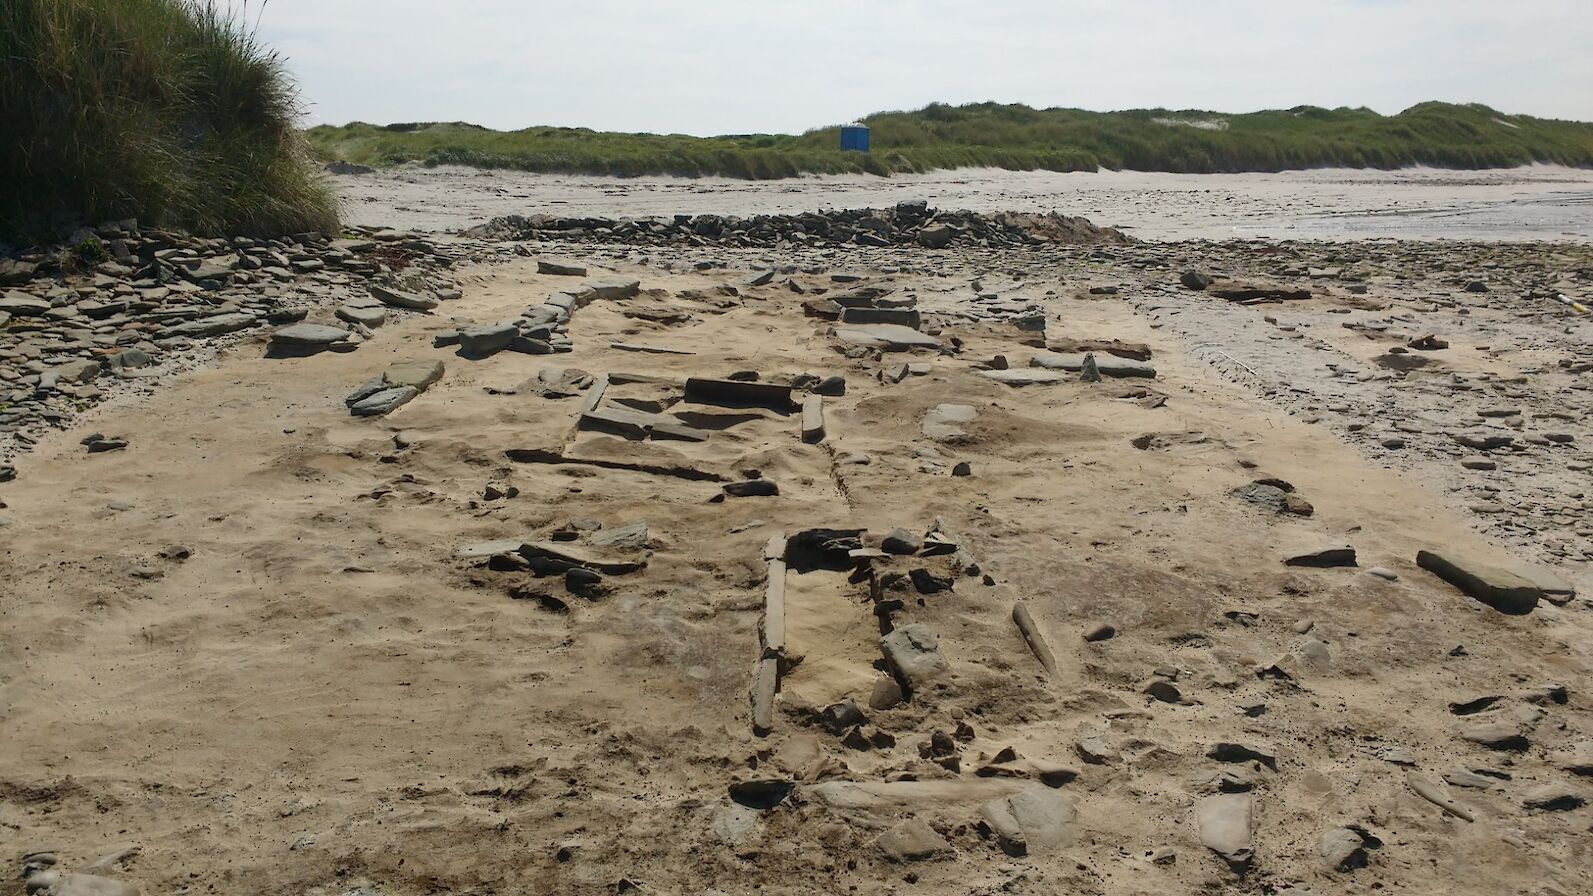 The main dig site at Cata Sand, Orkney - image courtesy Archaeology Institute UHI